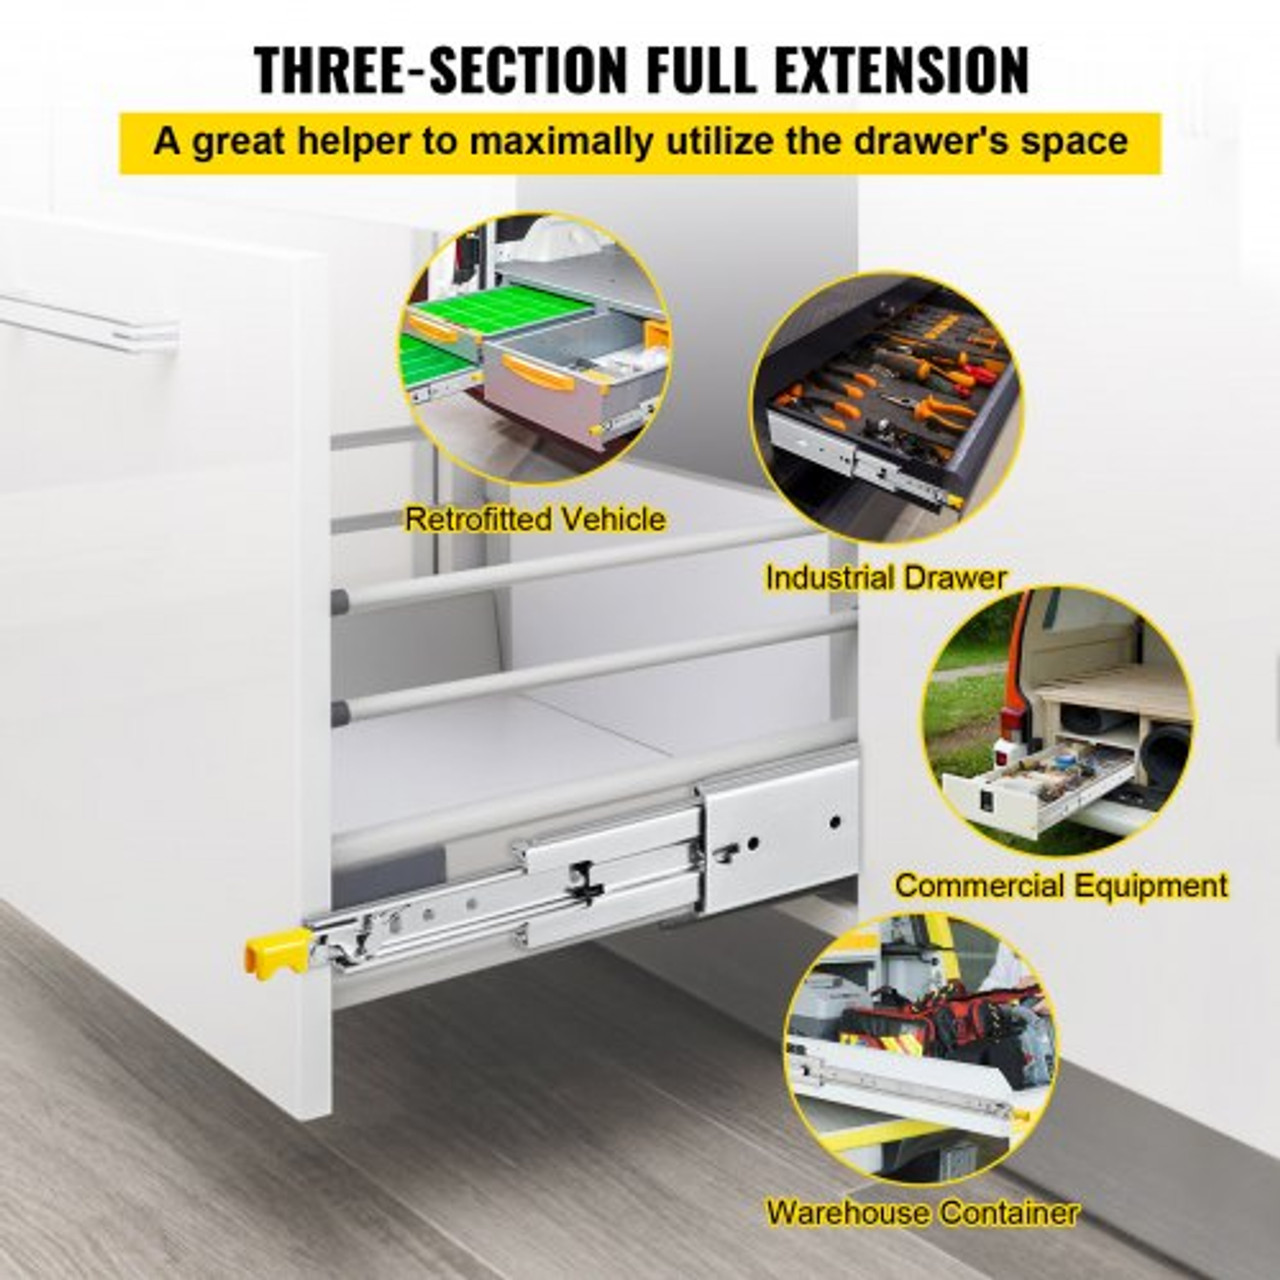 Drawer Slides with Lock, 1 Pair 56 inch, Heavy-Duty Industrial Steel up to 500 lbs Capacity, 3-Fold Full Extension, Ball Bearing Lock-in & Lock-Out, Side Mount